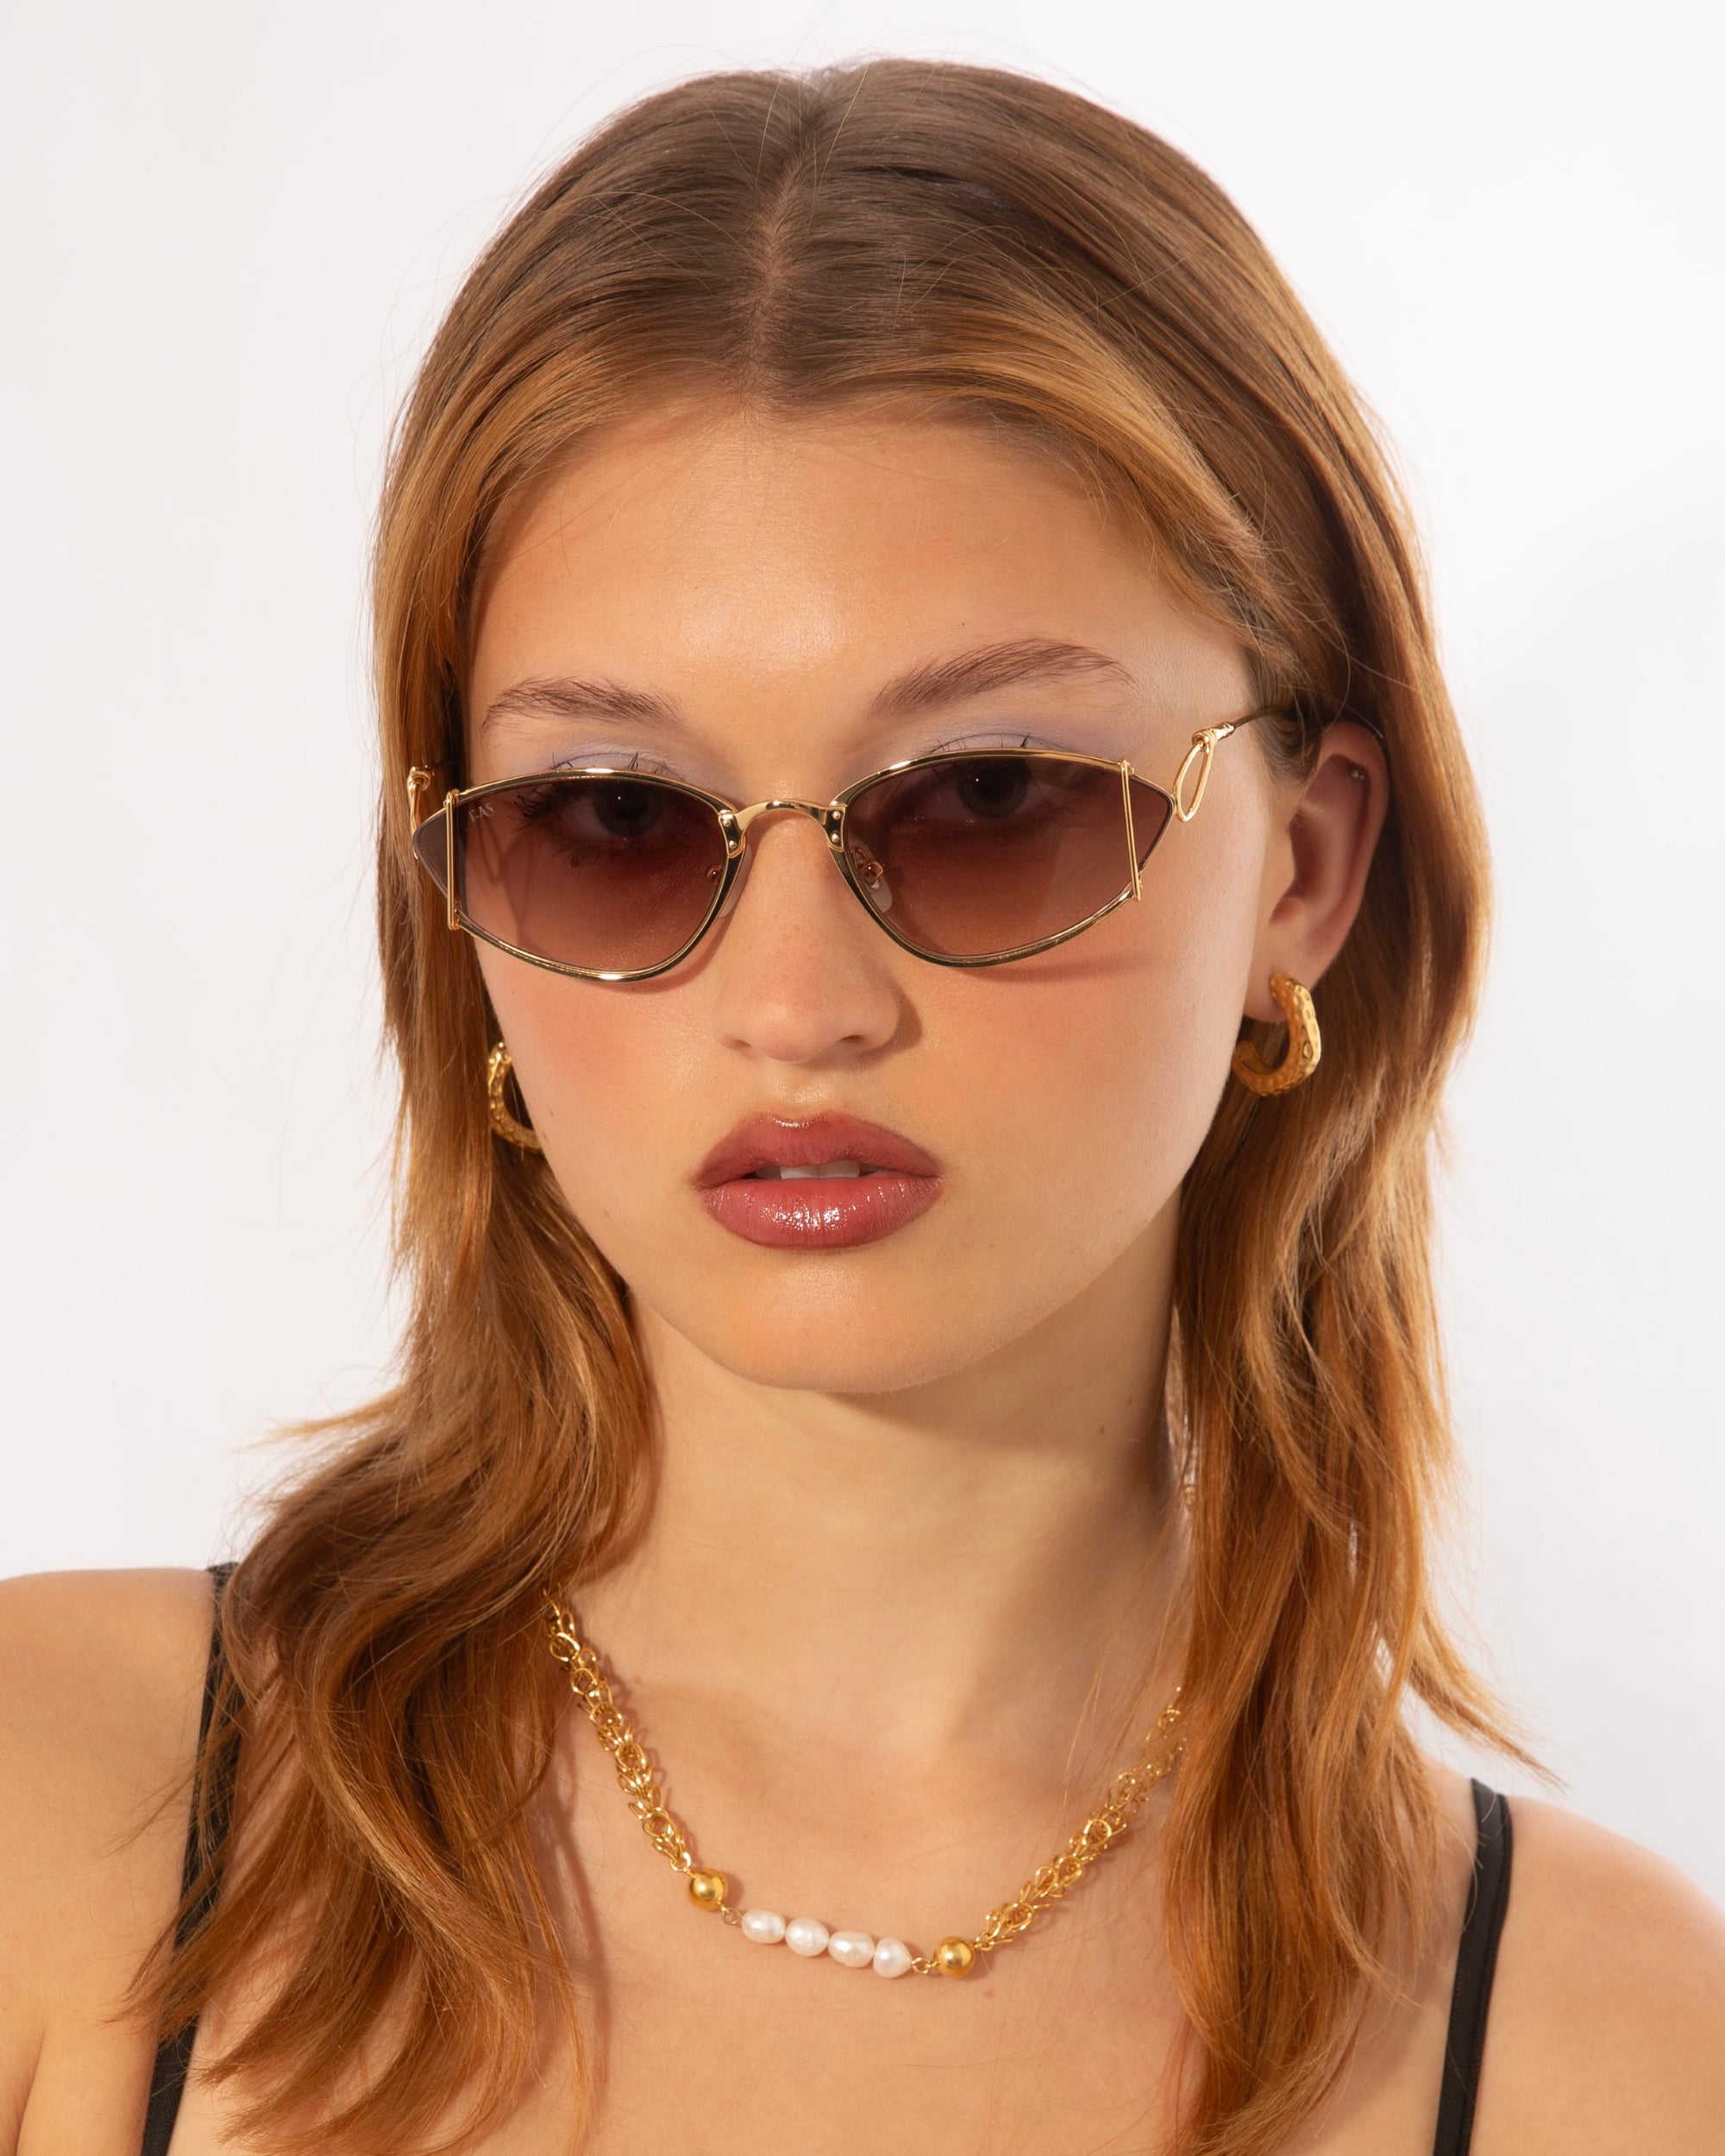 A person with medium-length brown hair wears fashionable almond-shaped For Art&#39;s Sake® Ornate sunglasses with tinted lenses, gold hoop earrings, and an 18-karat gold-plated stainless steel chain necklace with pearl accents. The background is a plain white setting.